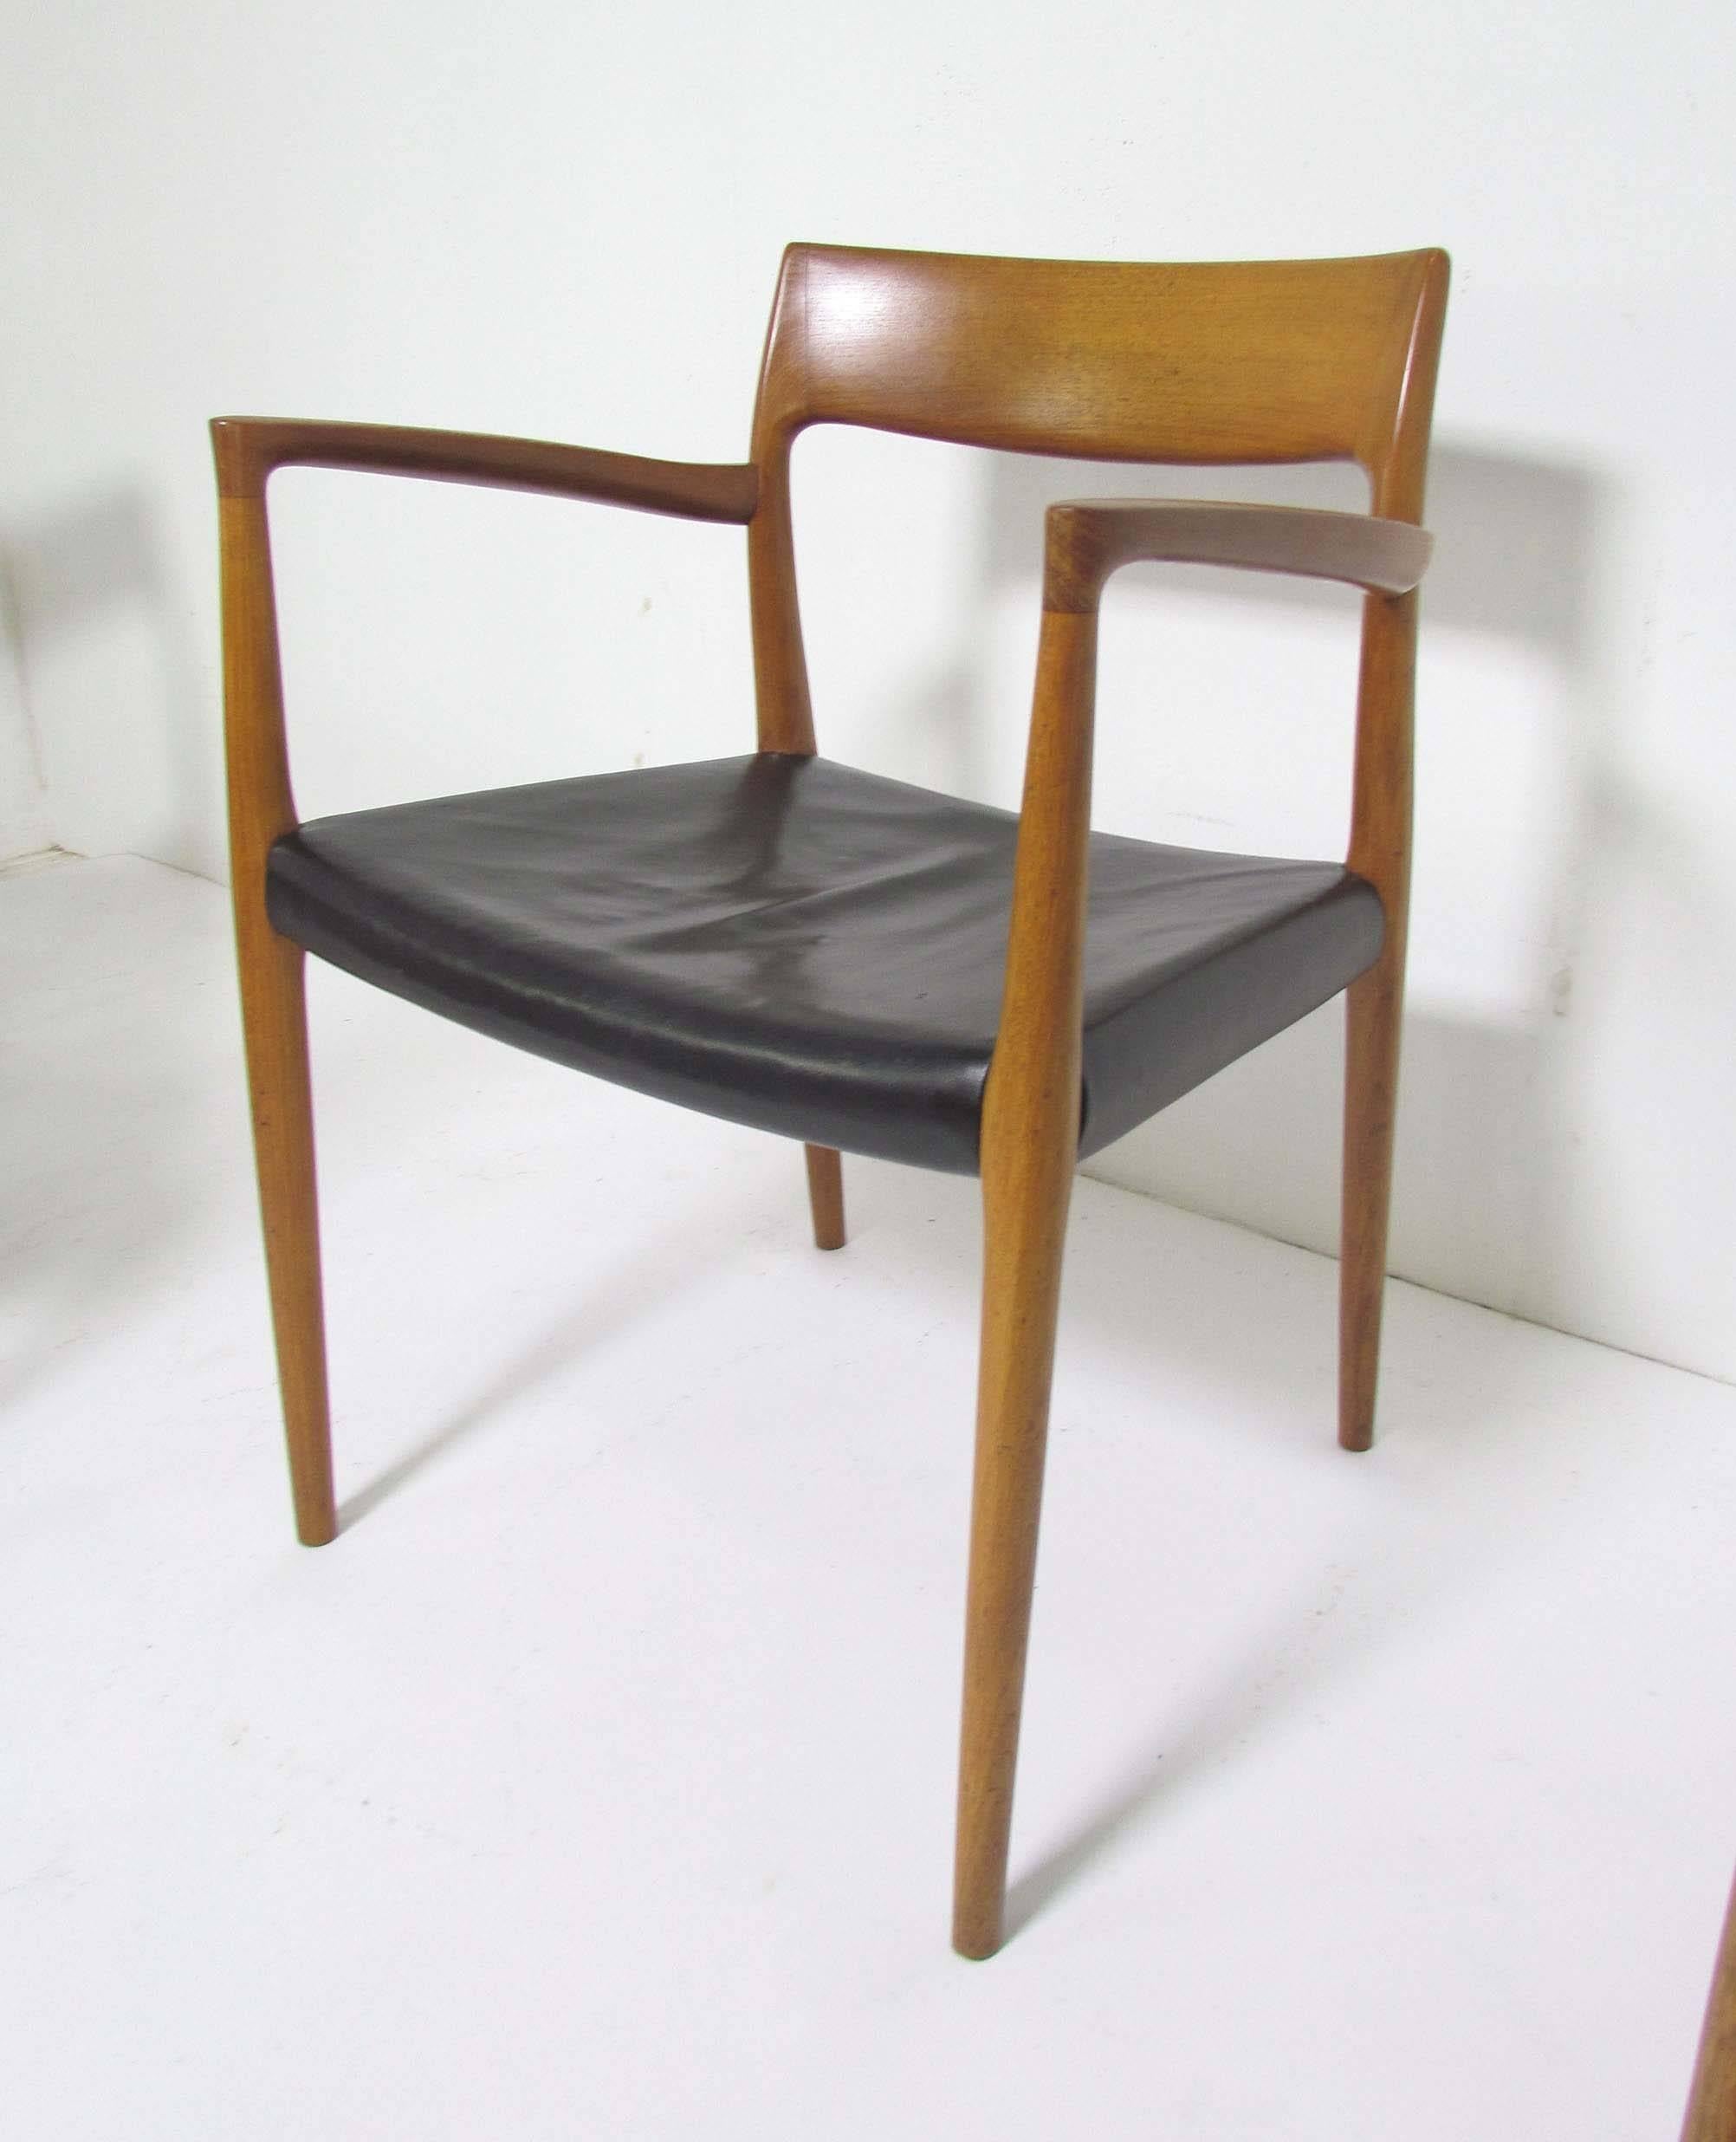 Set of five teak dining chairs (four model 77 side chairs and one model 57 armchair) designed by Niels Moeller for JL Mollers, Denmark, circa early 1960s, in original leather upholstery.

Side chairs measure: 19.5